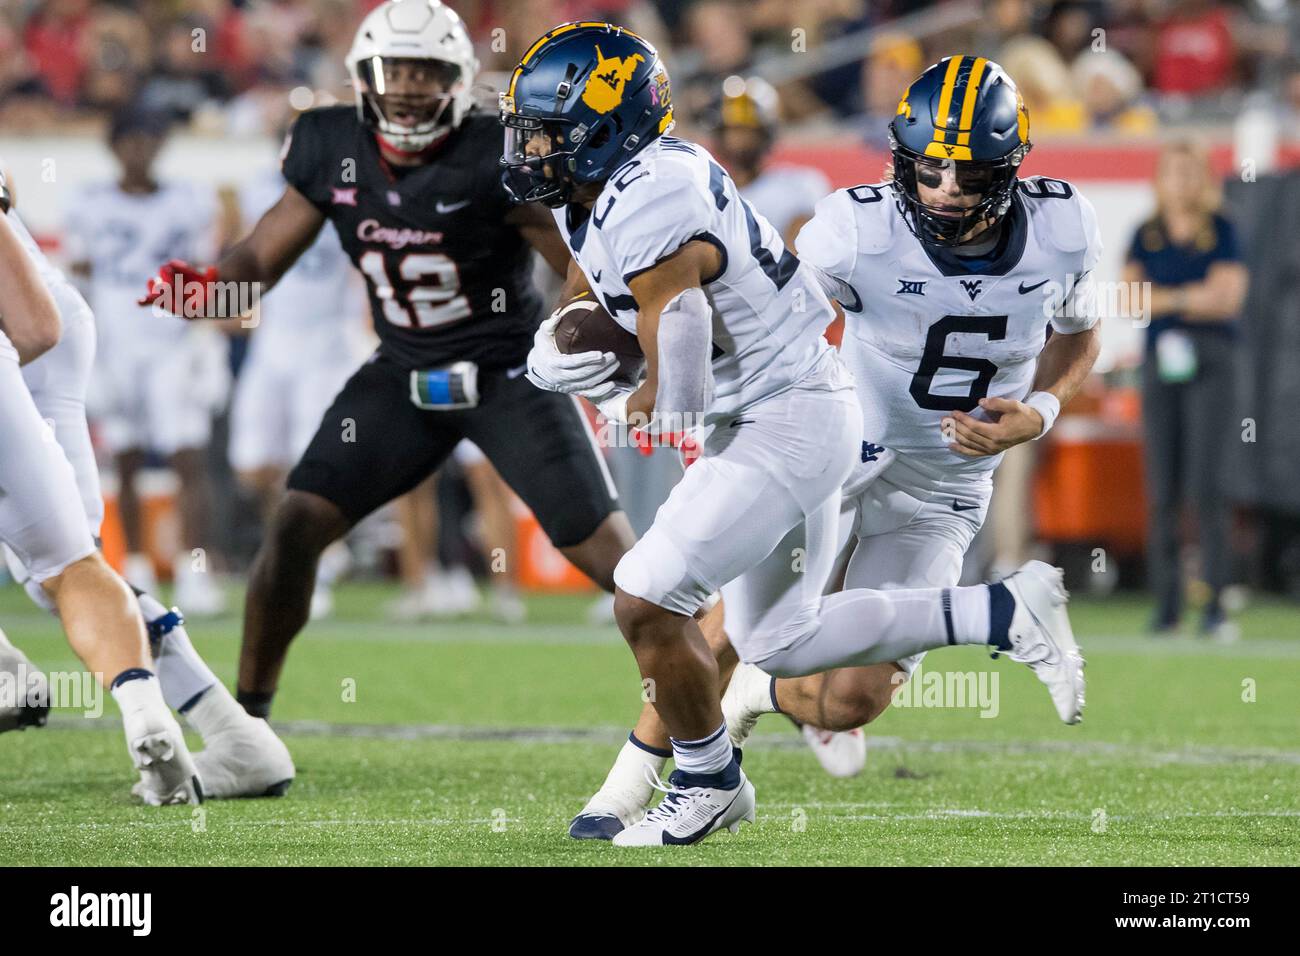 Houston, TX, USA. 12th Oct, 2023. West Virginia Mountaineers running back Jahiem White (22) carries the ball after receiving the handoff from quarterback Garrett Greene (6) during a game between the West Virginia Mountaineers and the Houston Cougars in Houston, TX. Trask Smith/CSM (Credit Image: © Trask Smith/Cal Sport Media). Credit: csm/Alamy Live News Stock Photo